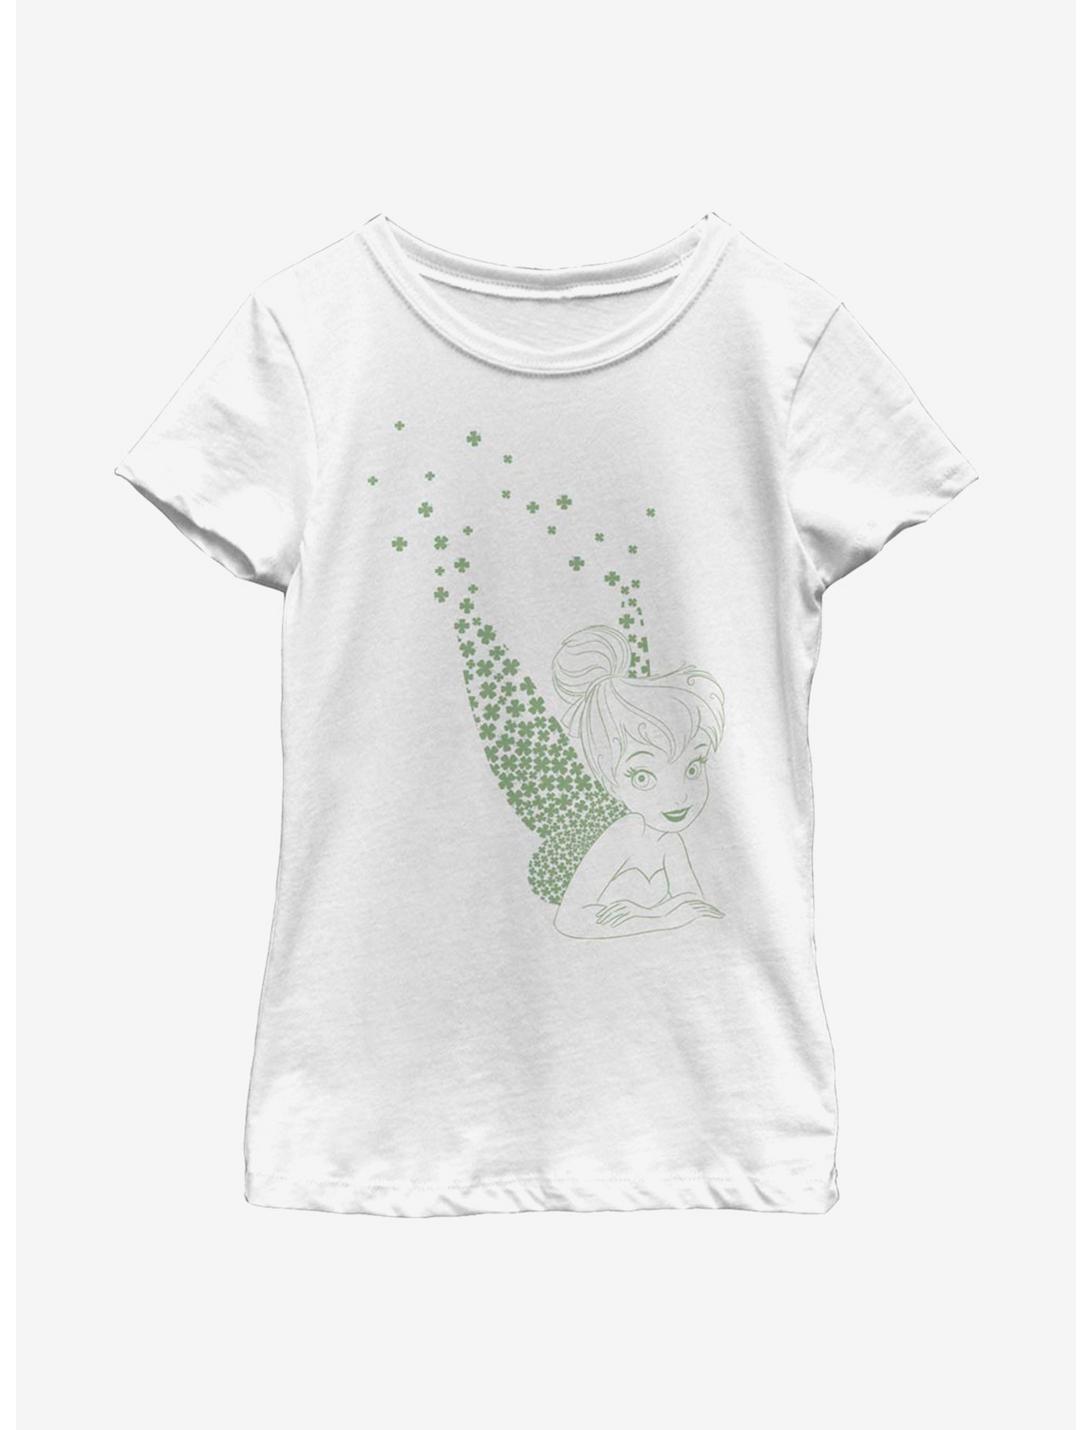 Disney Tinker Bell Tink Clovers Youth Girls T-Shirt, WHITE, hi-res